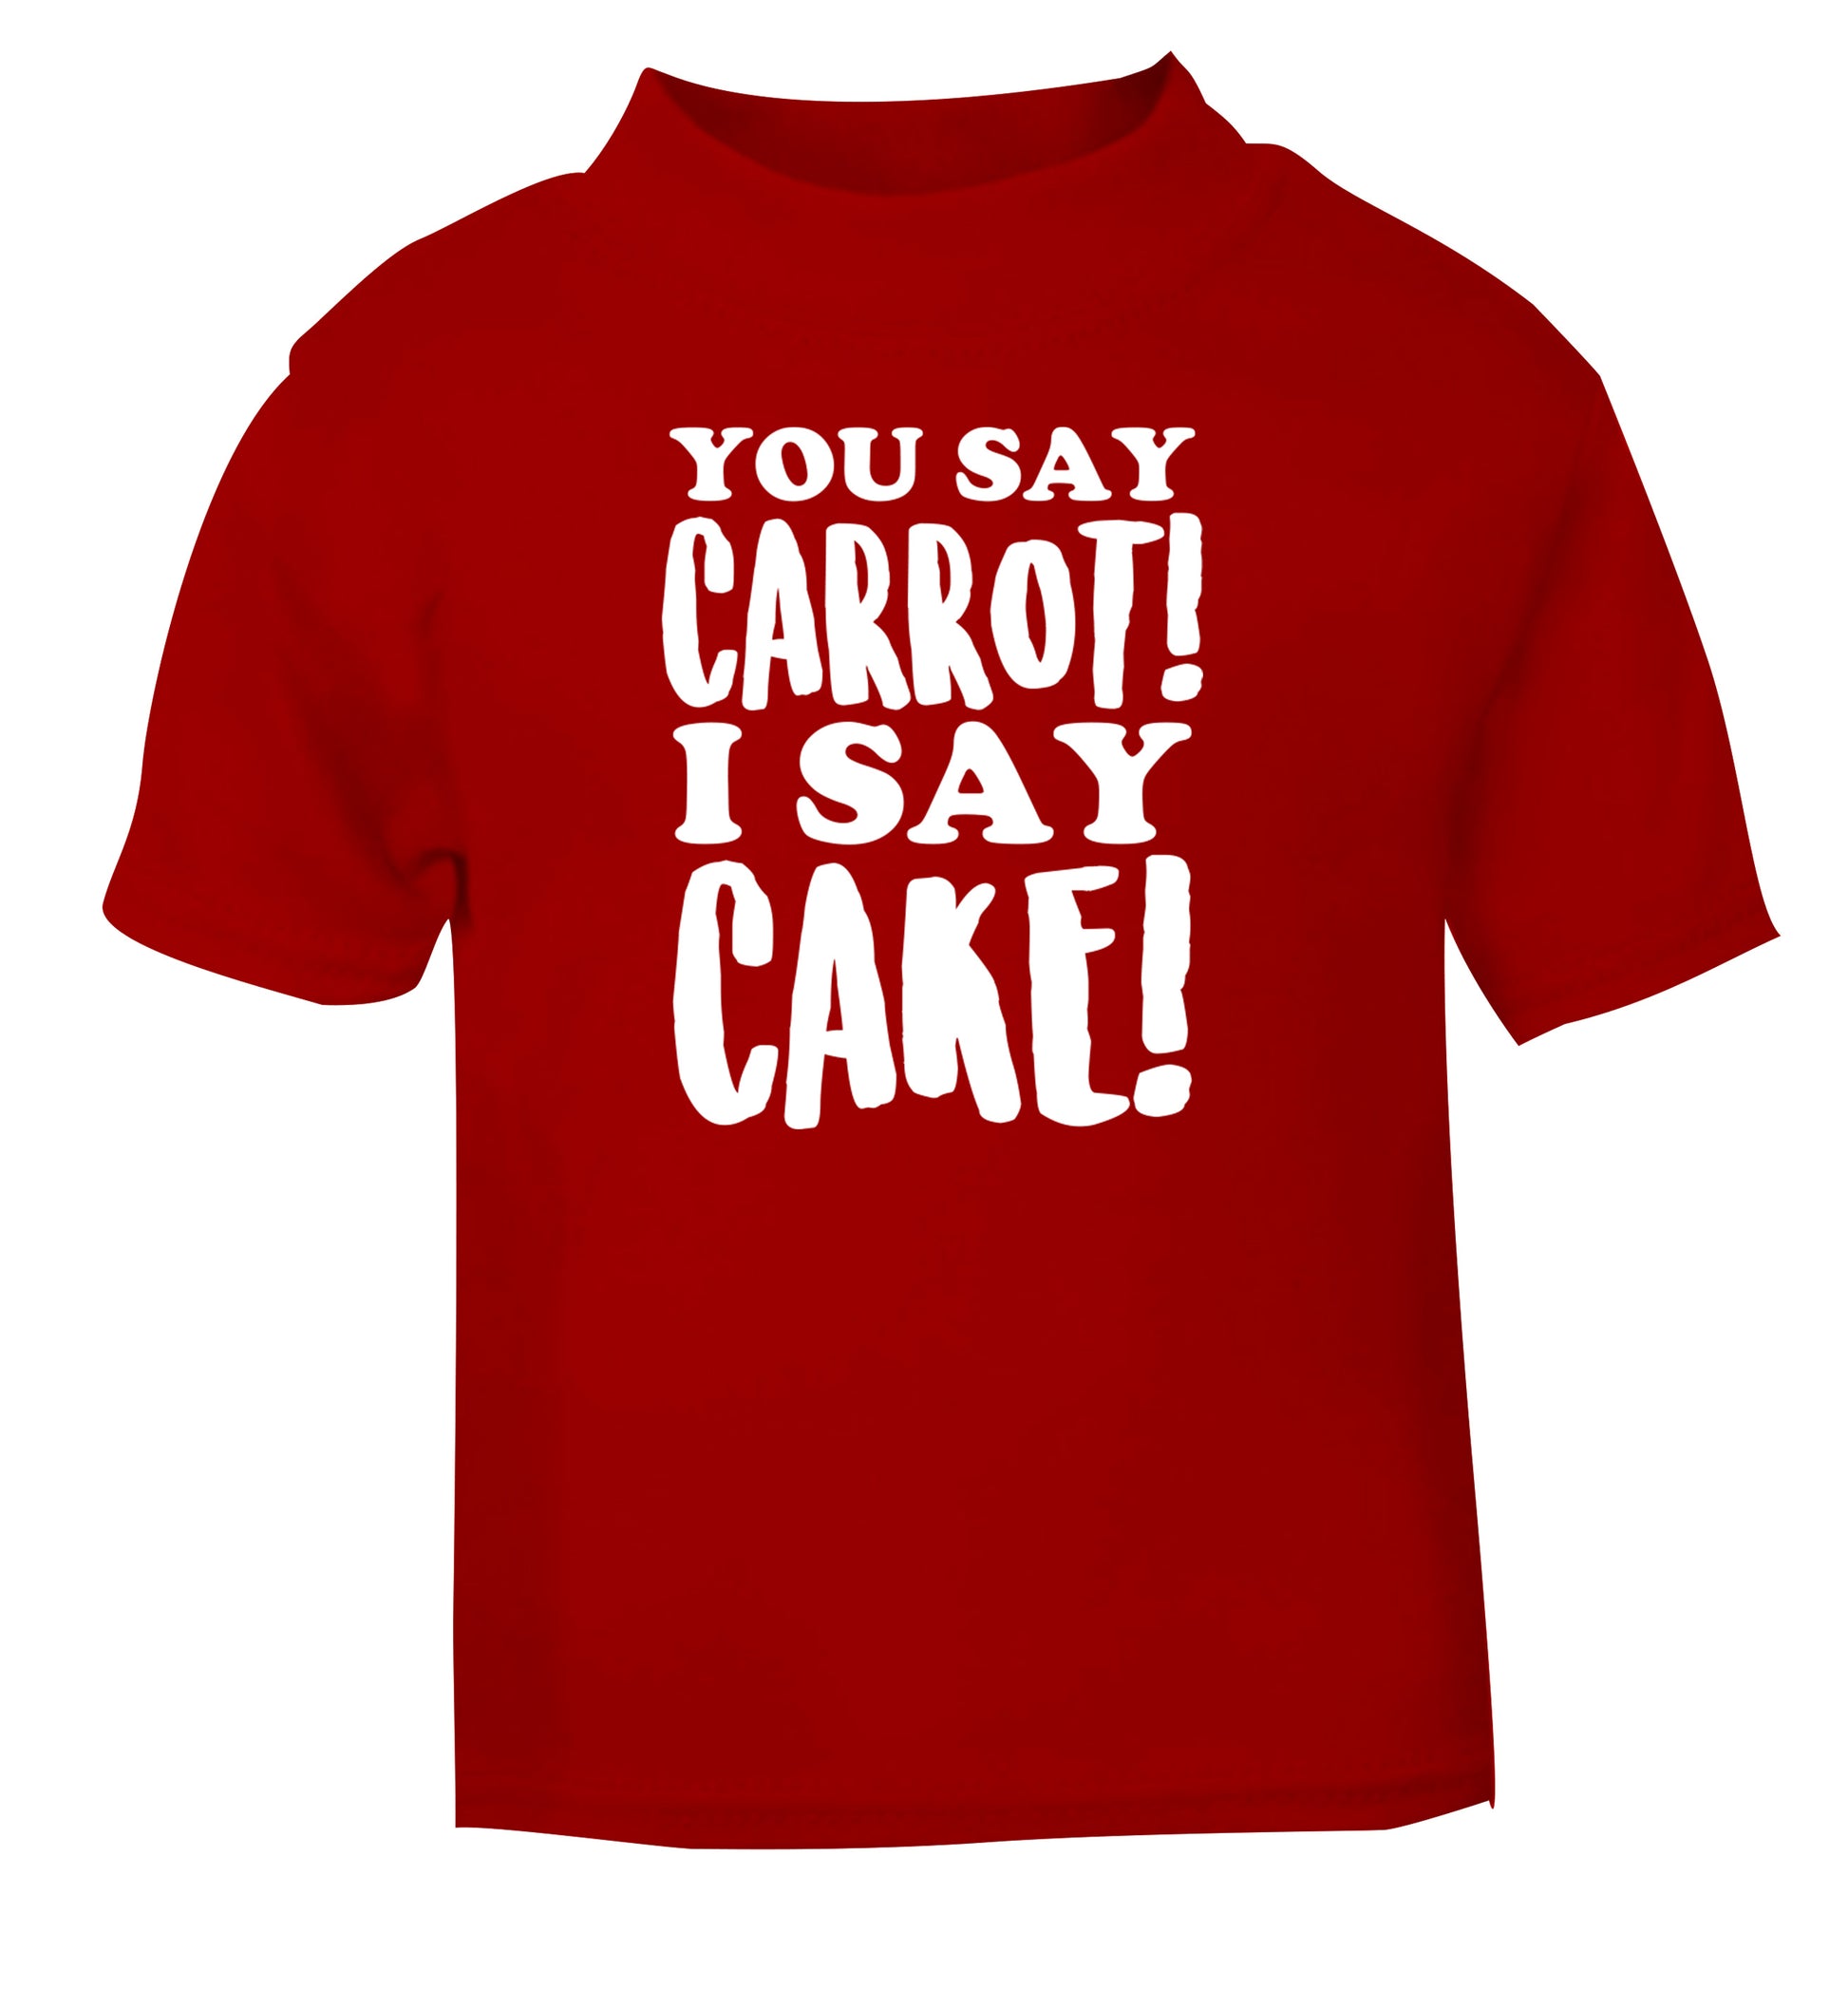 You say carrot I say cake! red Baby Toddler Tshirt 2 Years